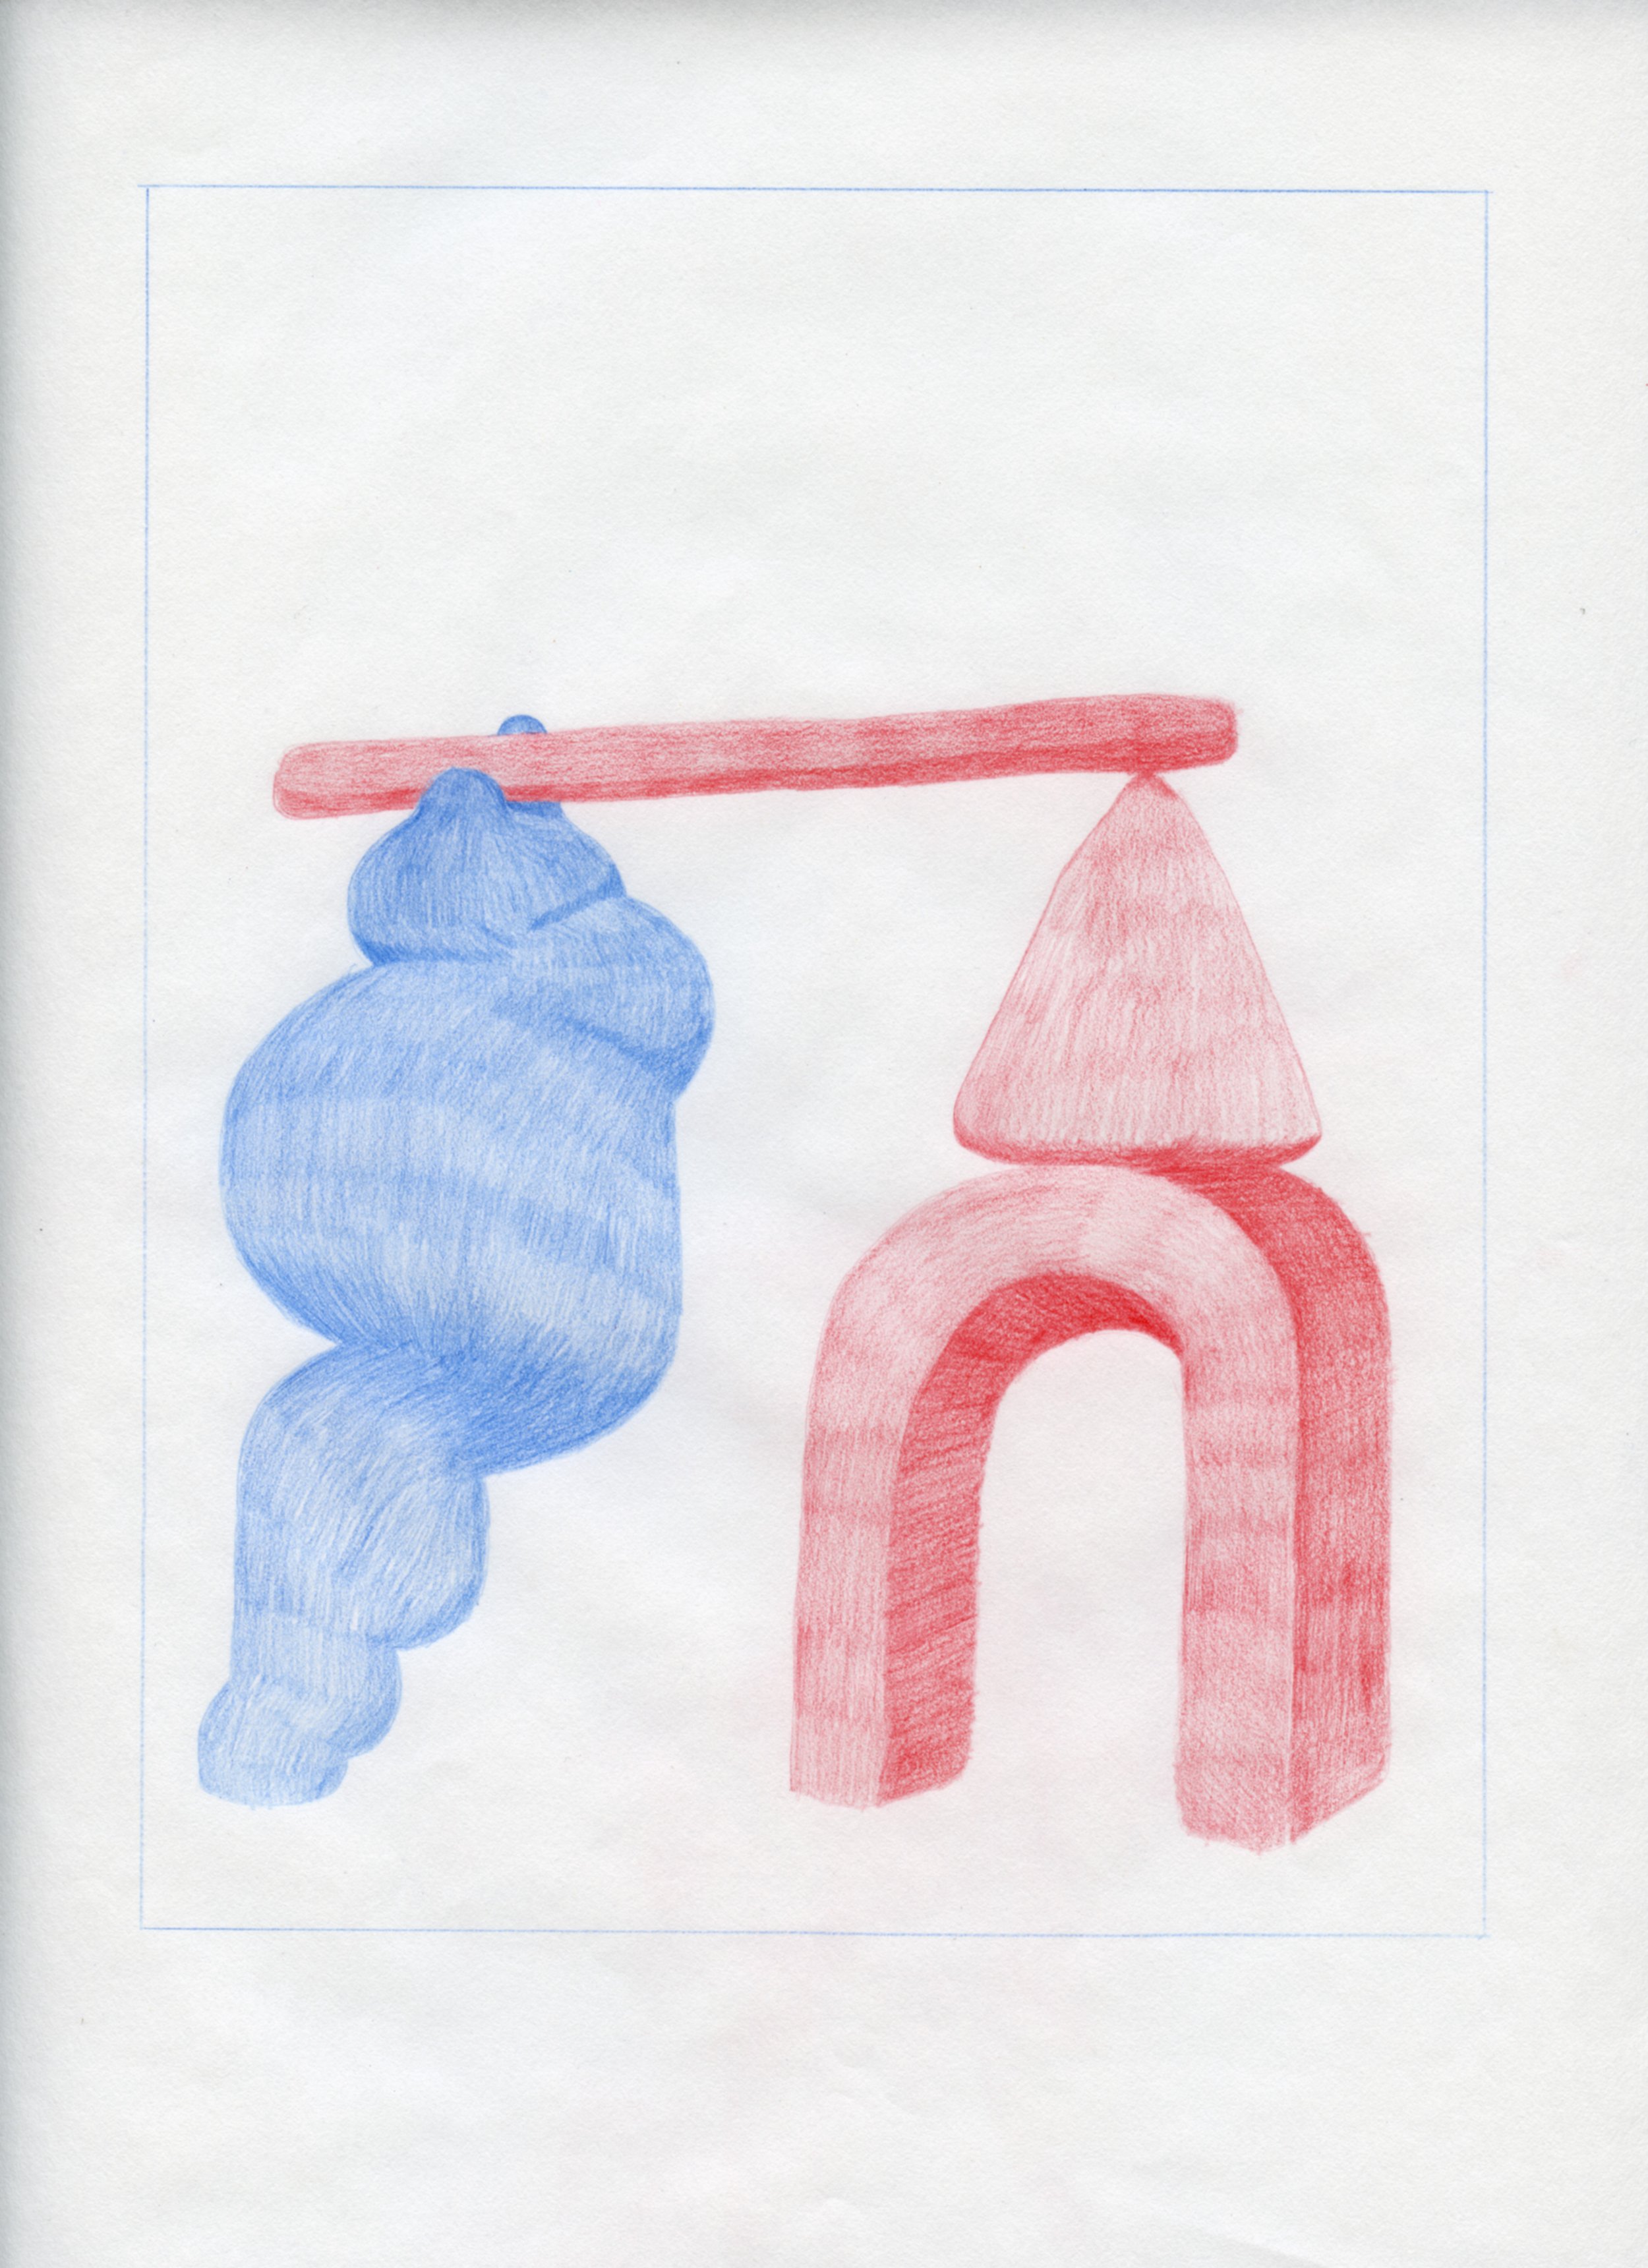   Workplace Drawing #1,  2021, Red and Blue Graphite on Bond Paper, 9”x 12”. 